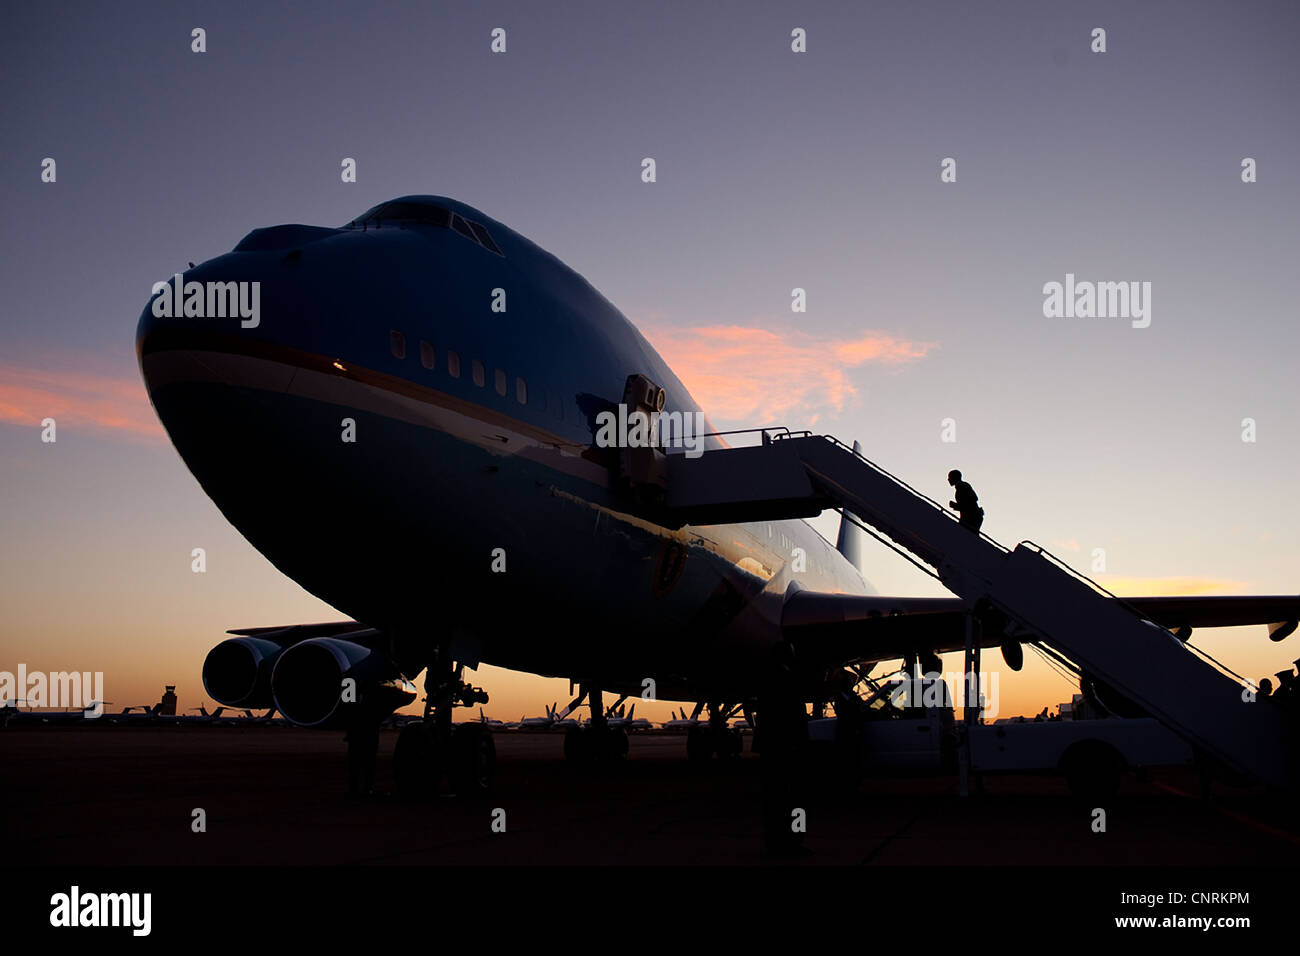 Präsident Barack Obama Platinen in Roswell, NM bei Sonnenuntergang 21. März 2012 Air Force One. Stockfoto